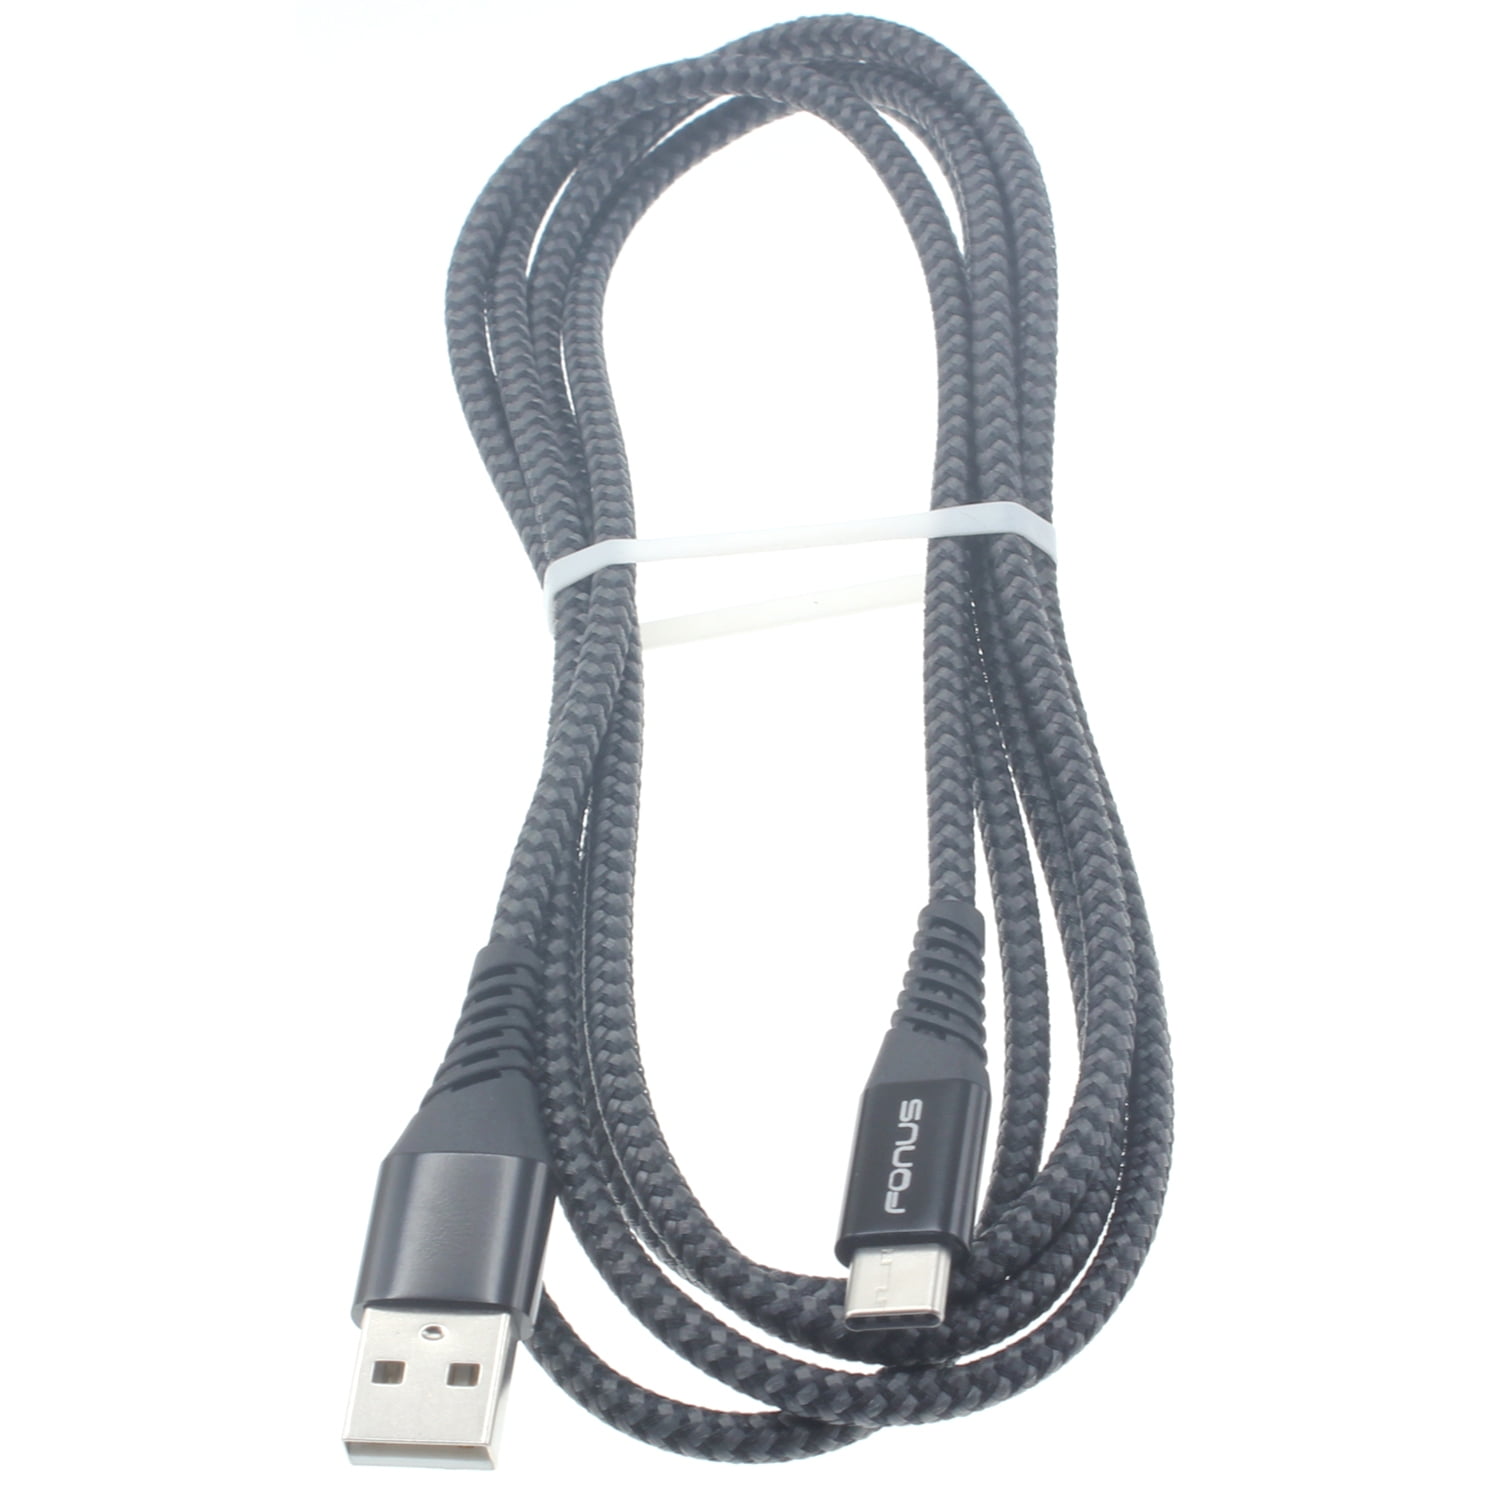 Note: This Item is NOT fit Seagate GoFlex Satellite External Storage HDD SLLEA USB 5V DC Charging Cable Tablet Charger Power Cord Lead for Ktec P3812 KSAPK0110500200FU NABI 2 